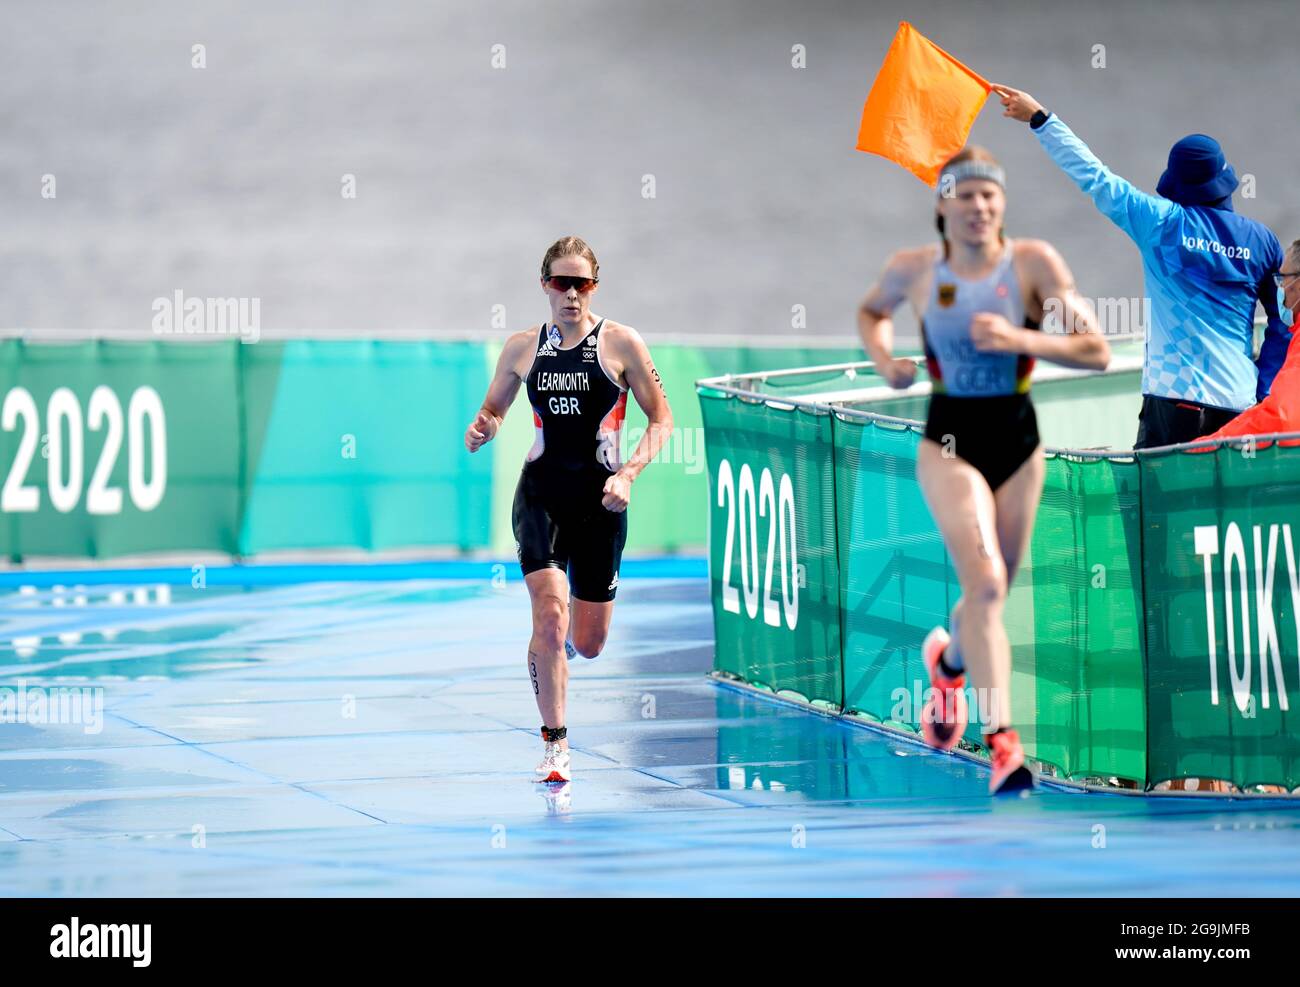 Great Britain's Jessica Learmonth during the Women's Triathlon at the Odaiba Marine Park on the fourth day of the Tokyo 2020 Olympic Games in Japan. Picture date: Tuesday July 27, 2021. Stock Photo